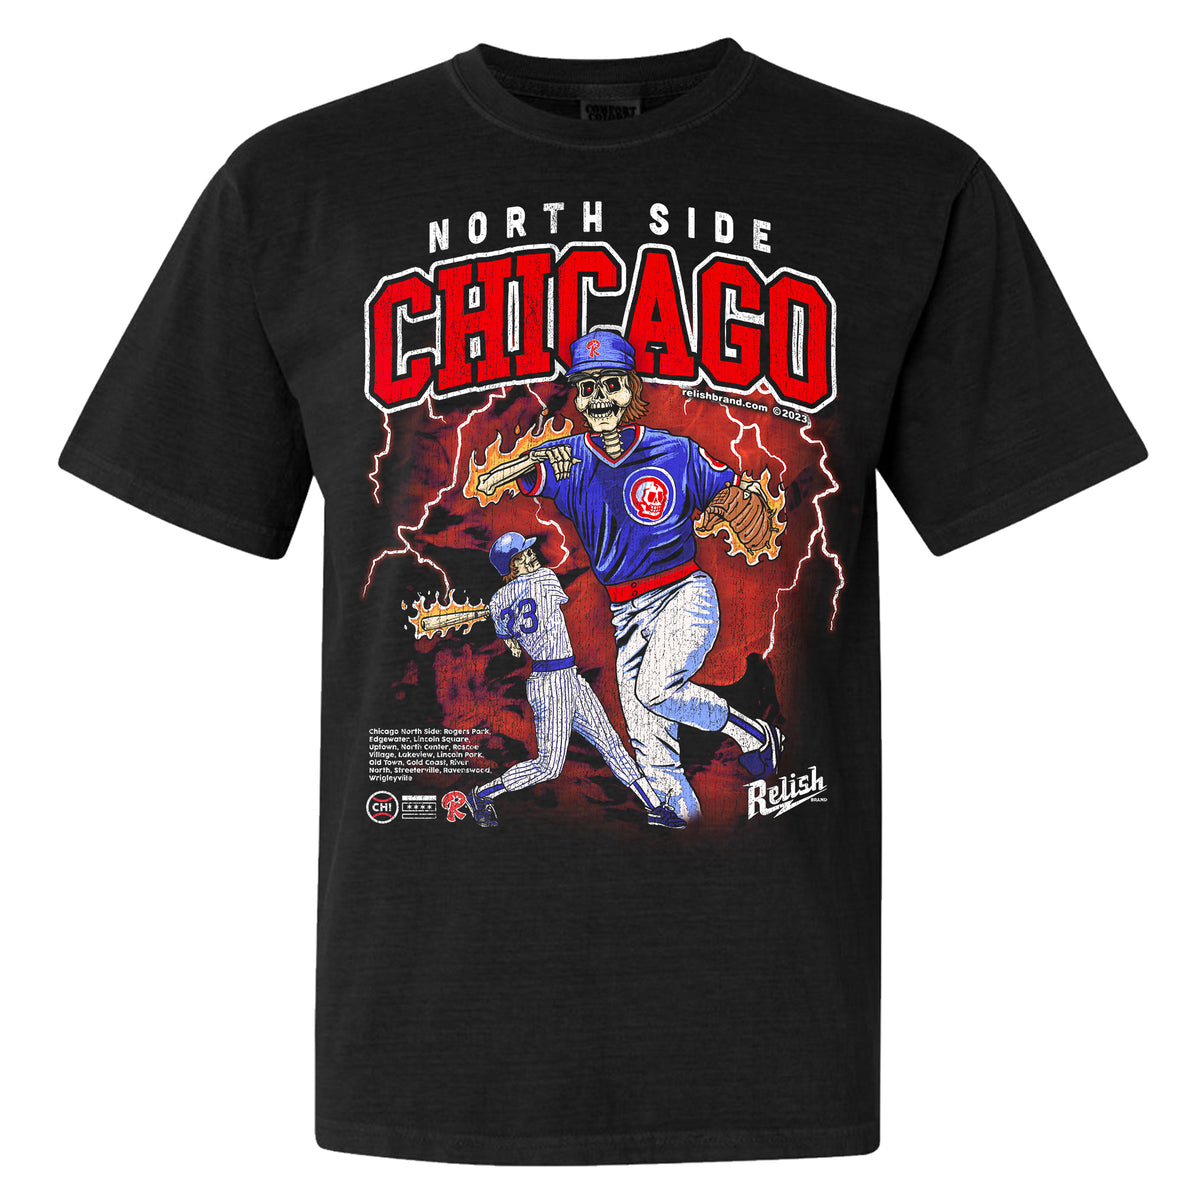 Chicago Cubs Black Friday Deals, Clearance Cubs Apparel